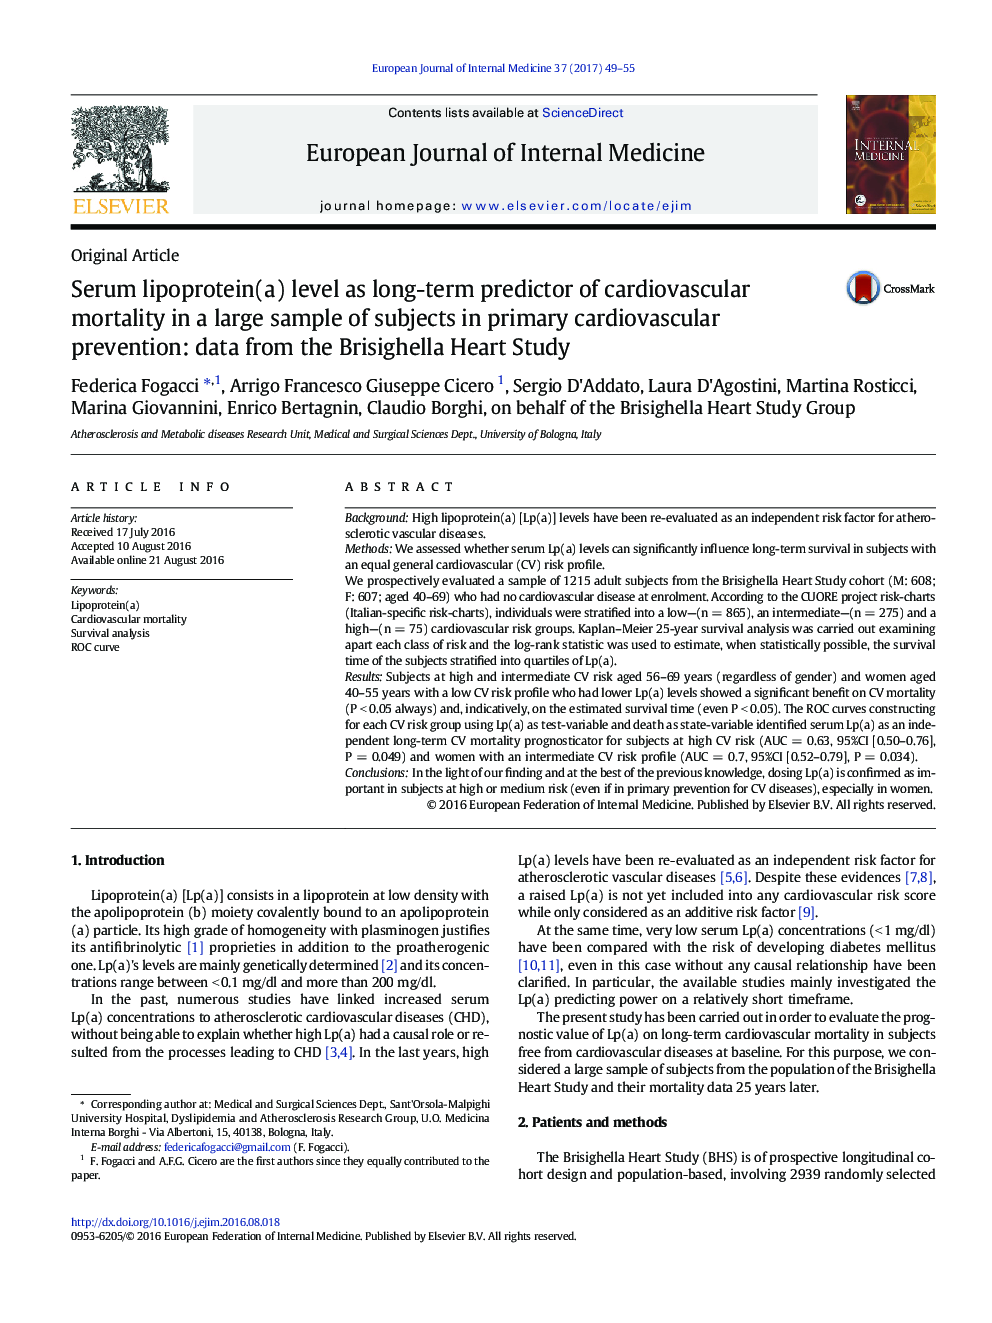 Serum lipoprotein(a) level as long-term predictor of cardiovascular mortality in a large sample of subjects in primary cardiovascular prevention: data from the Brisighella Heart Study